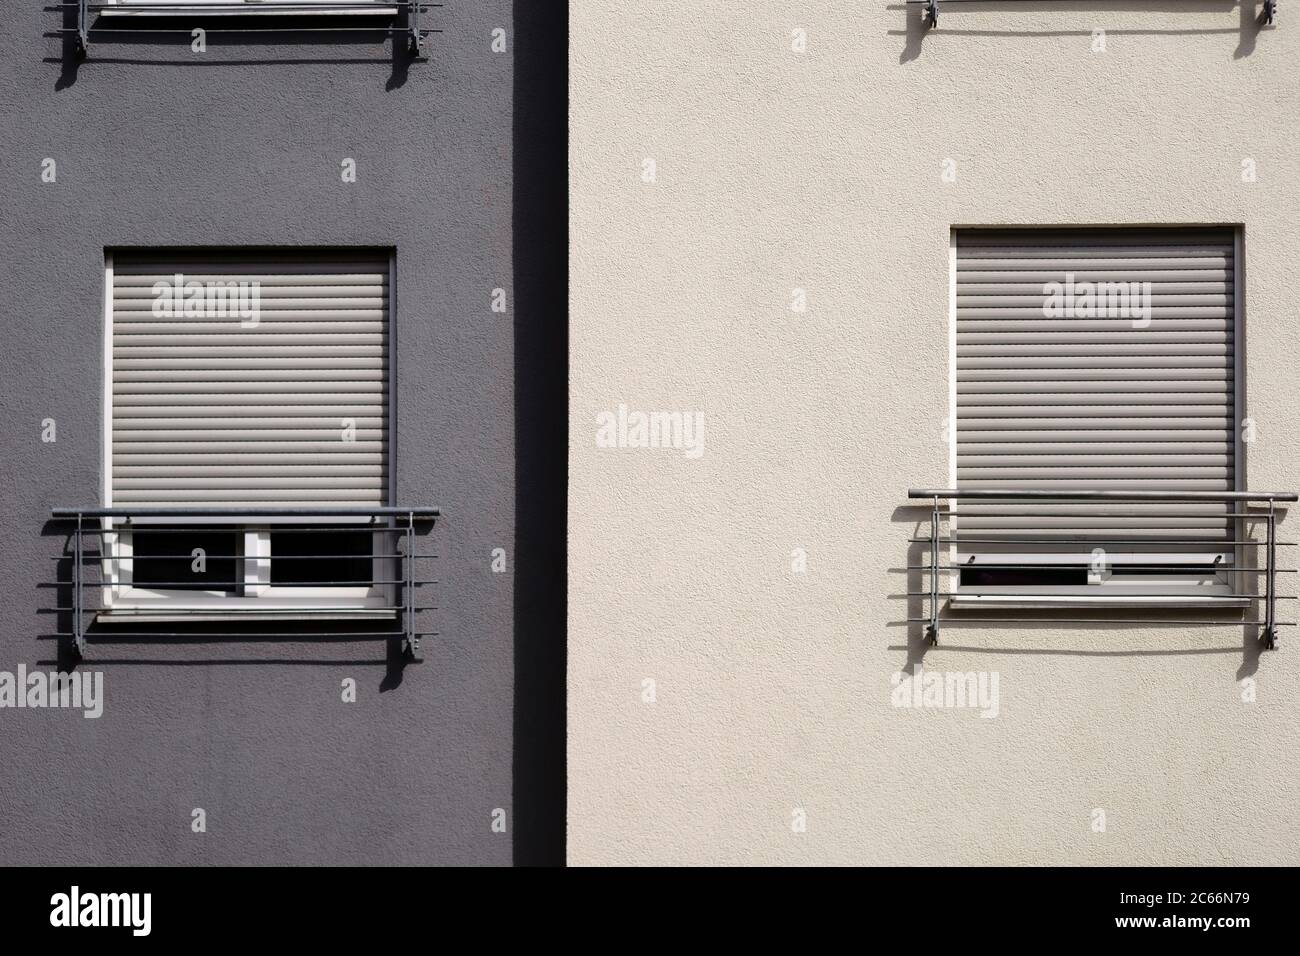 The modern facade of a modern residential building with windows and blinds, Stock Photo